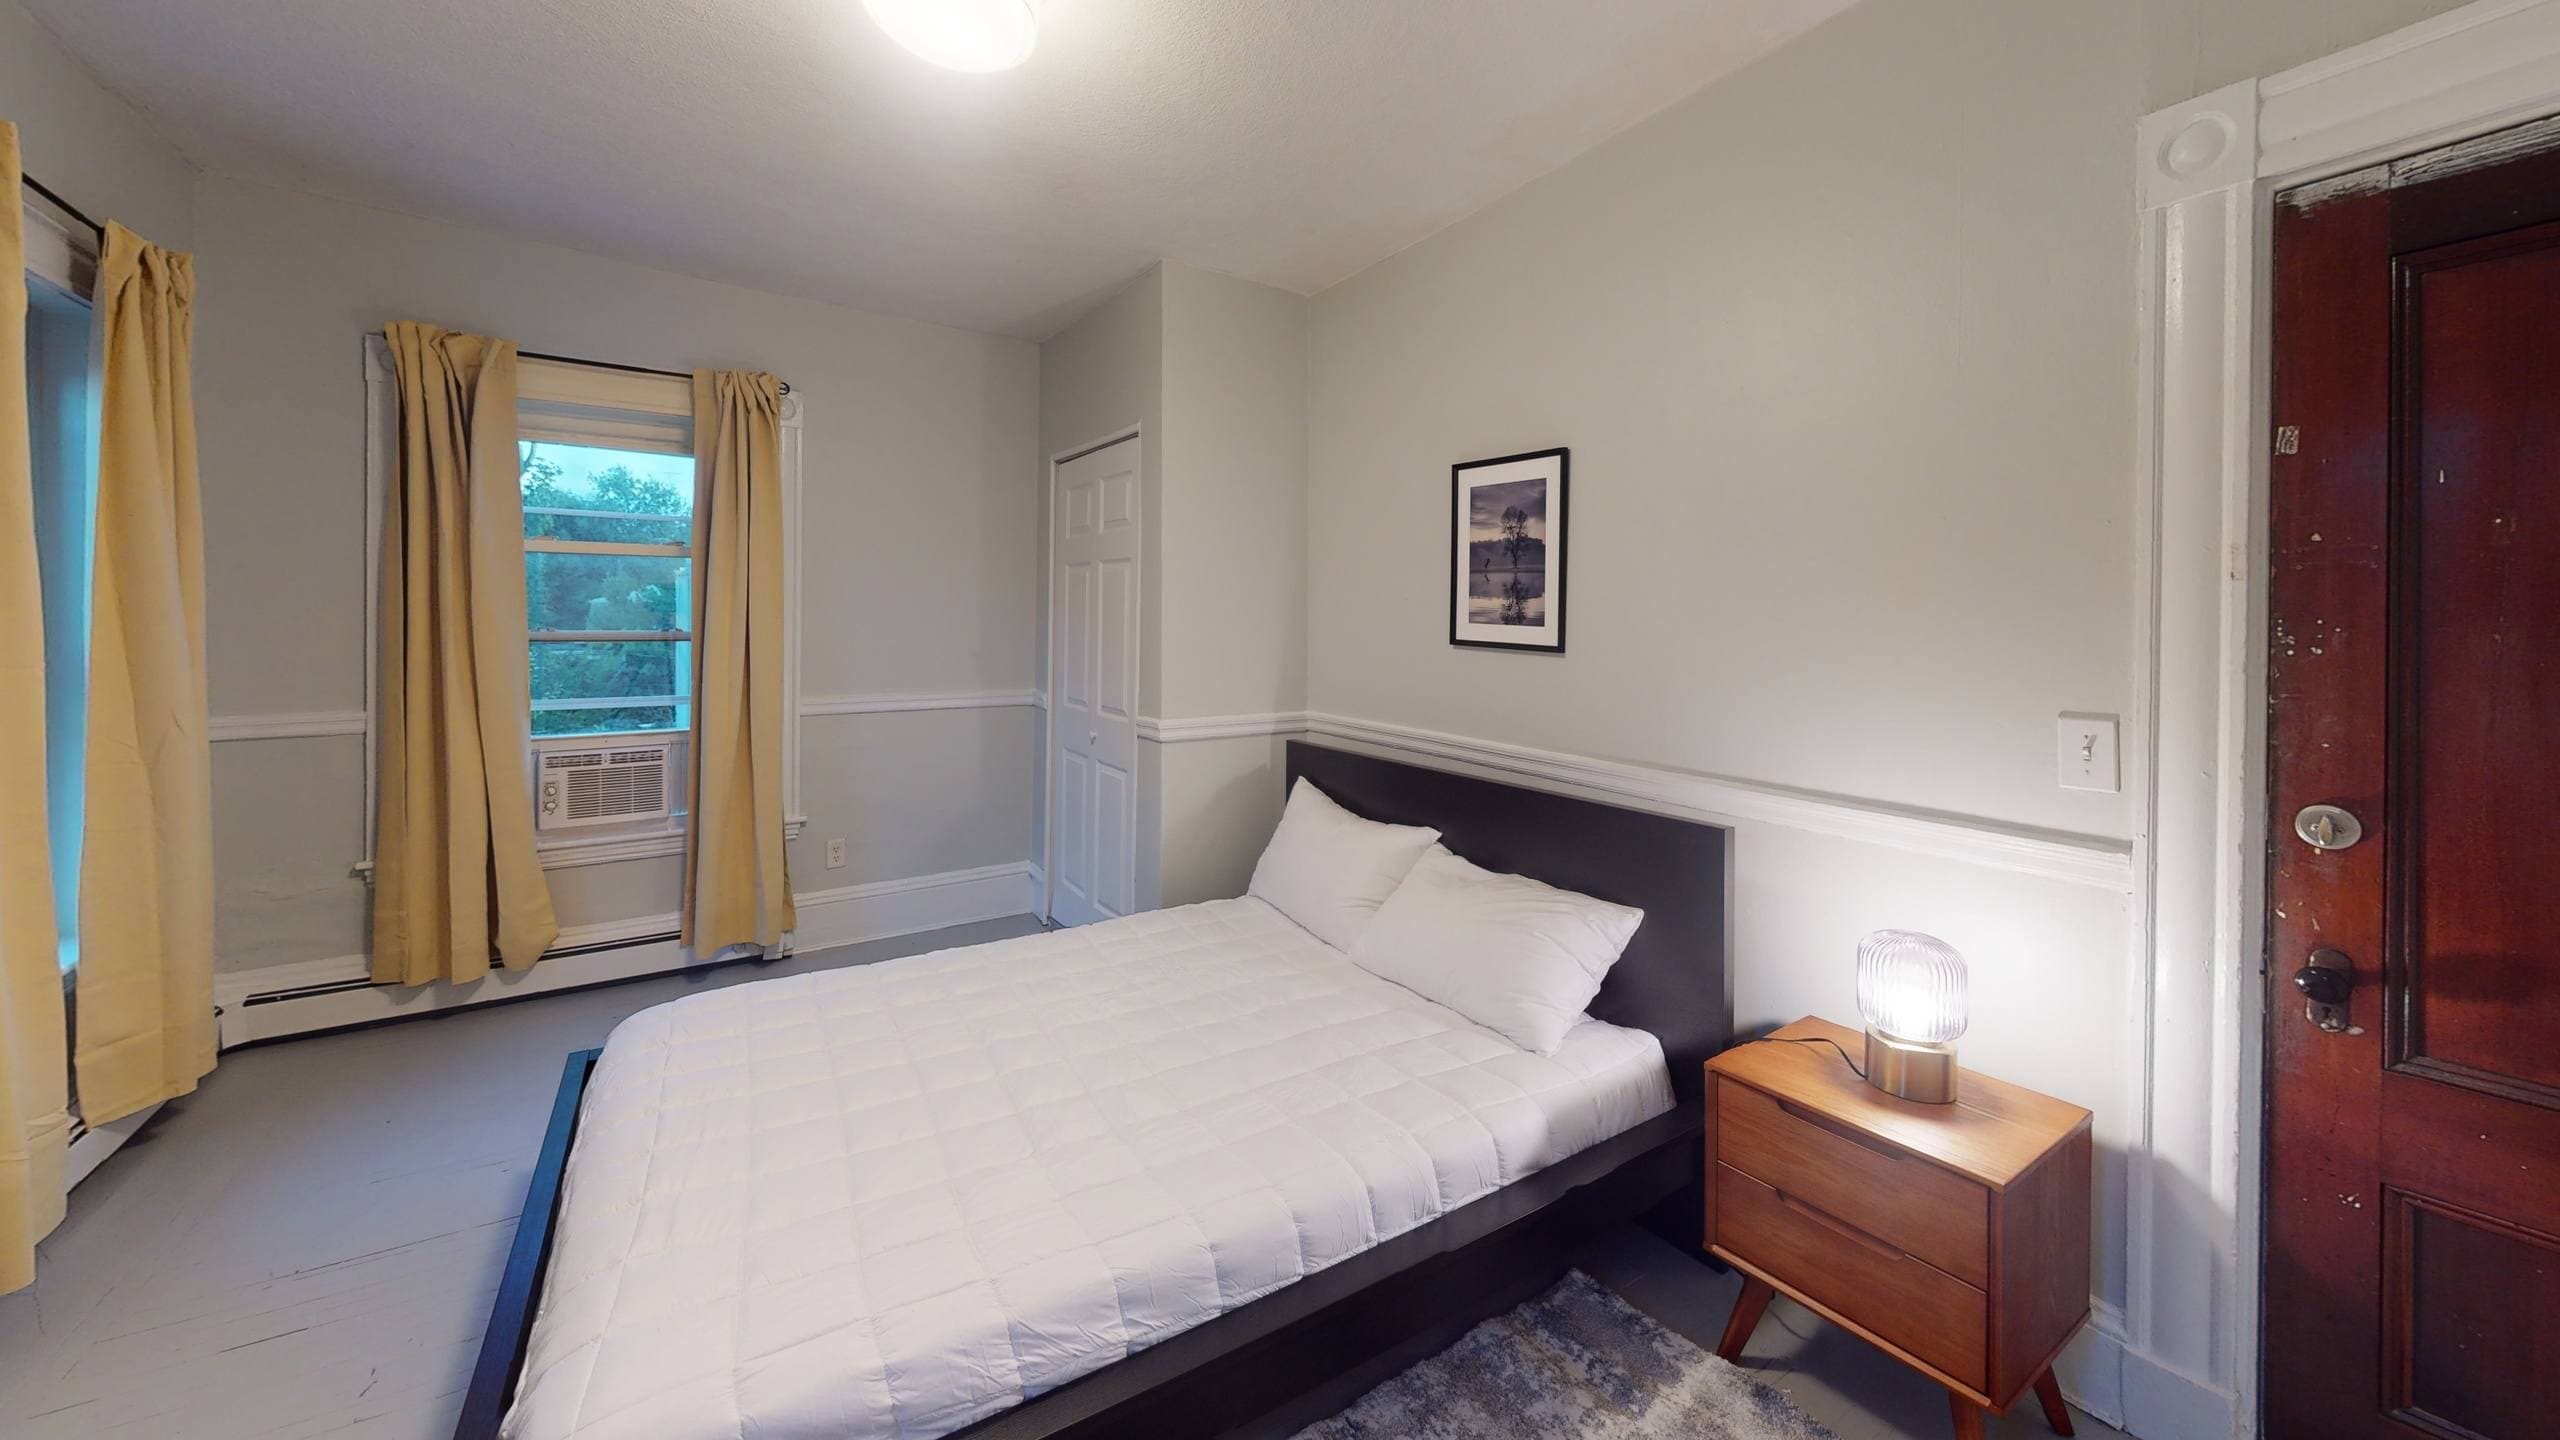 Photo 15 of #1359: Queen Bedroom A at June Homes